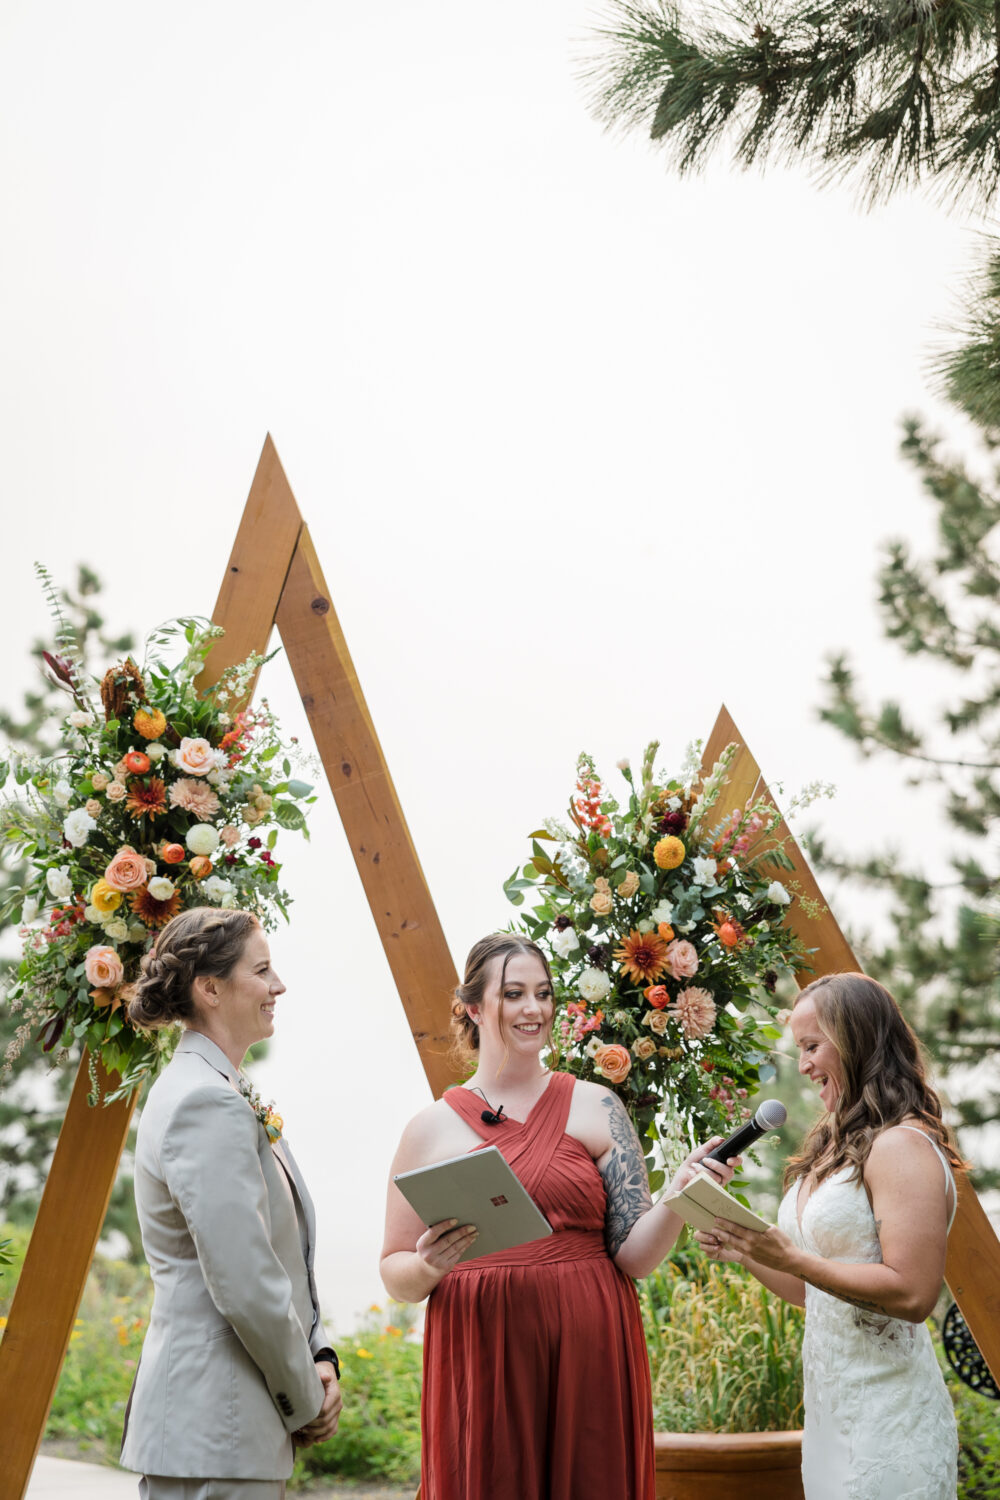 Two brides exchange vows in front of two triangular wooden wedding arches.